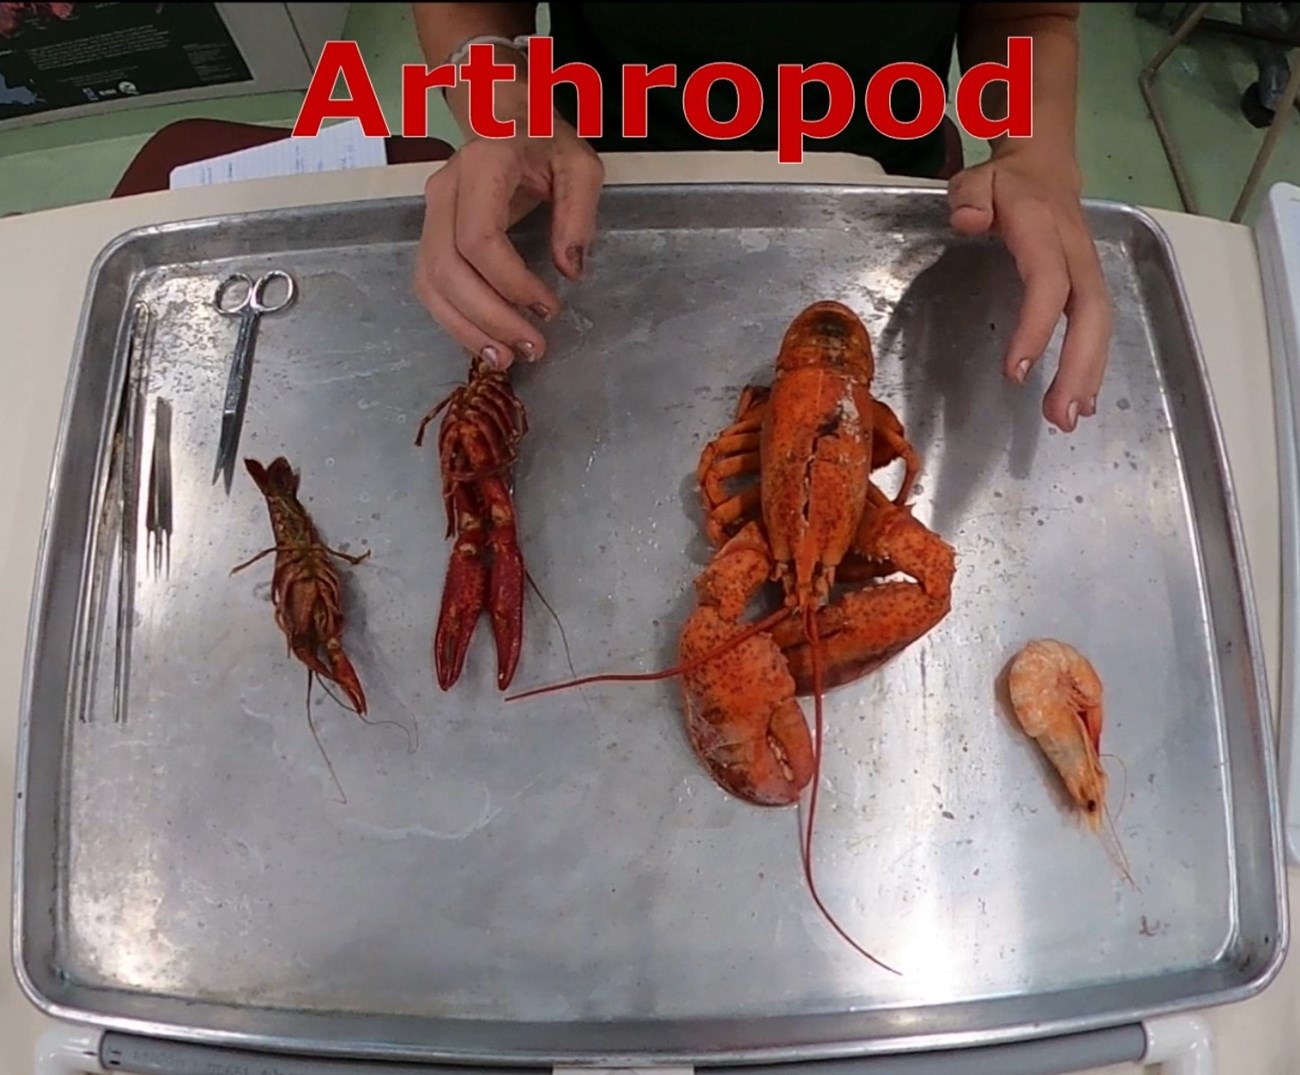 a crawfish on a tray with the word "Arthropod"